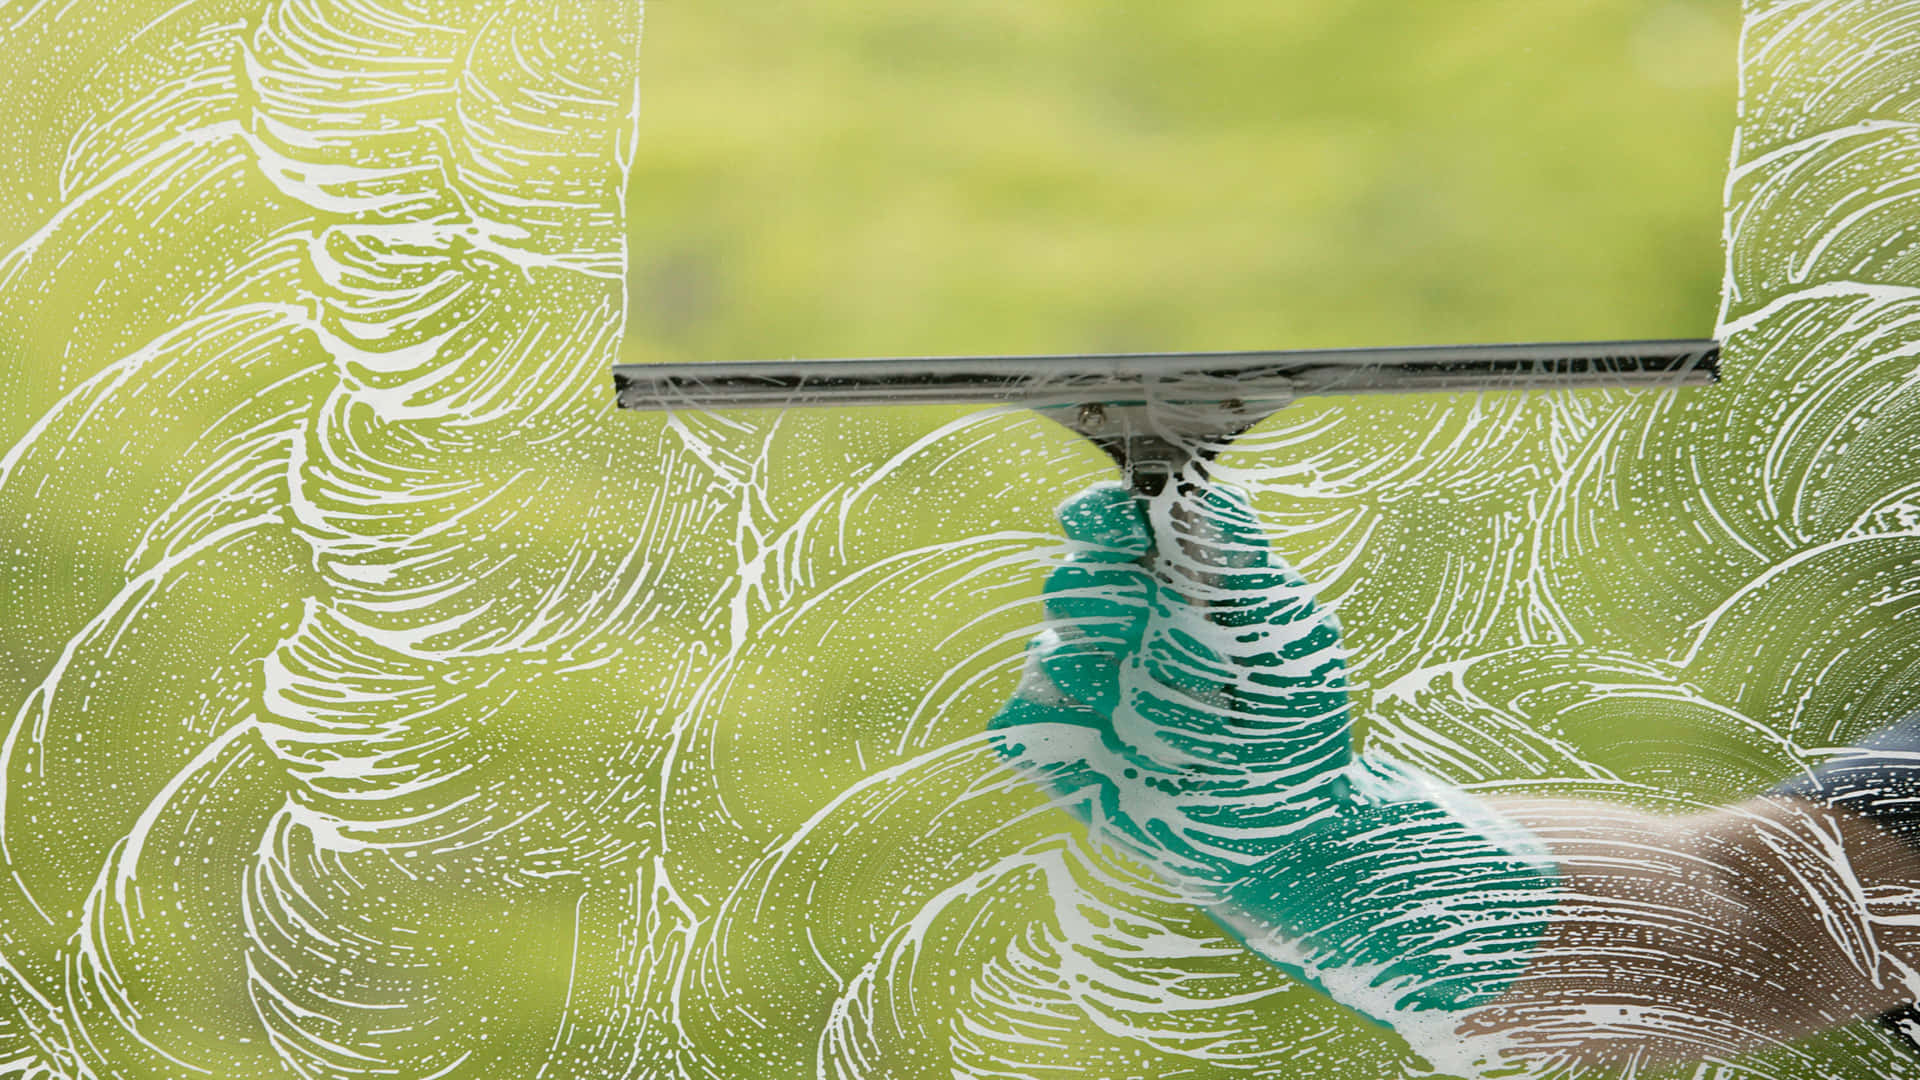 Cleaning Window Squeegee Background